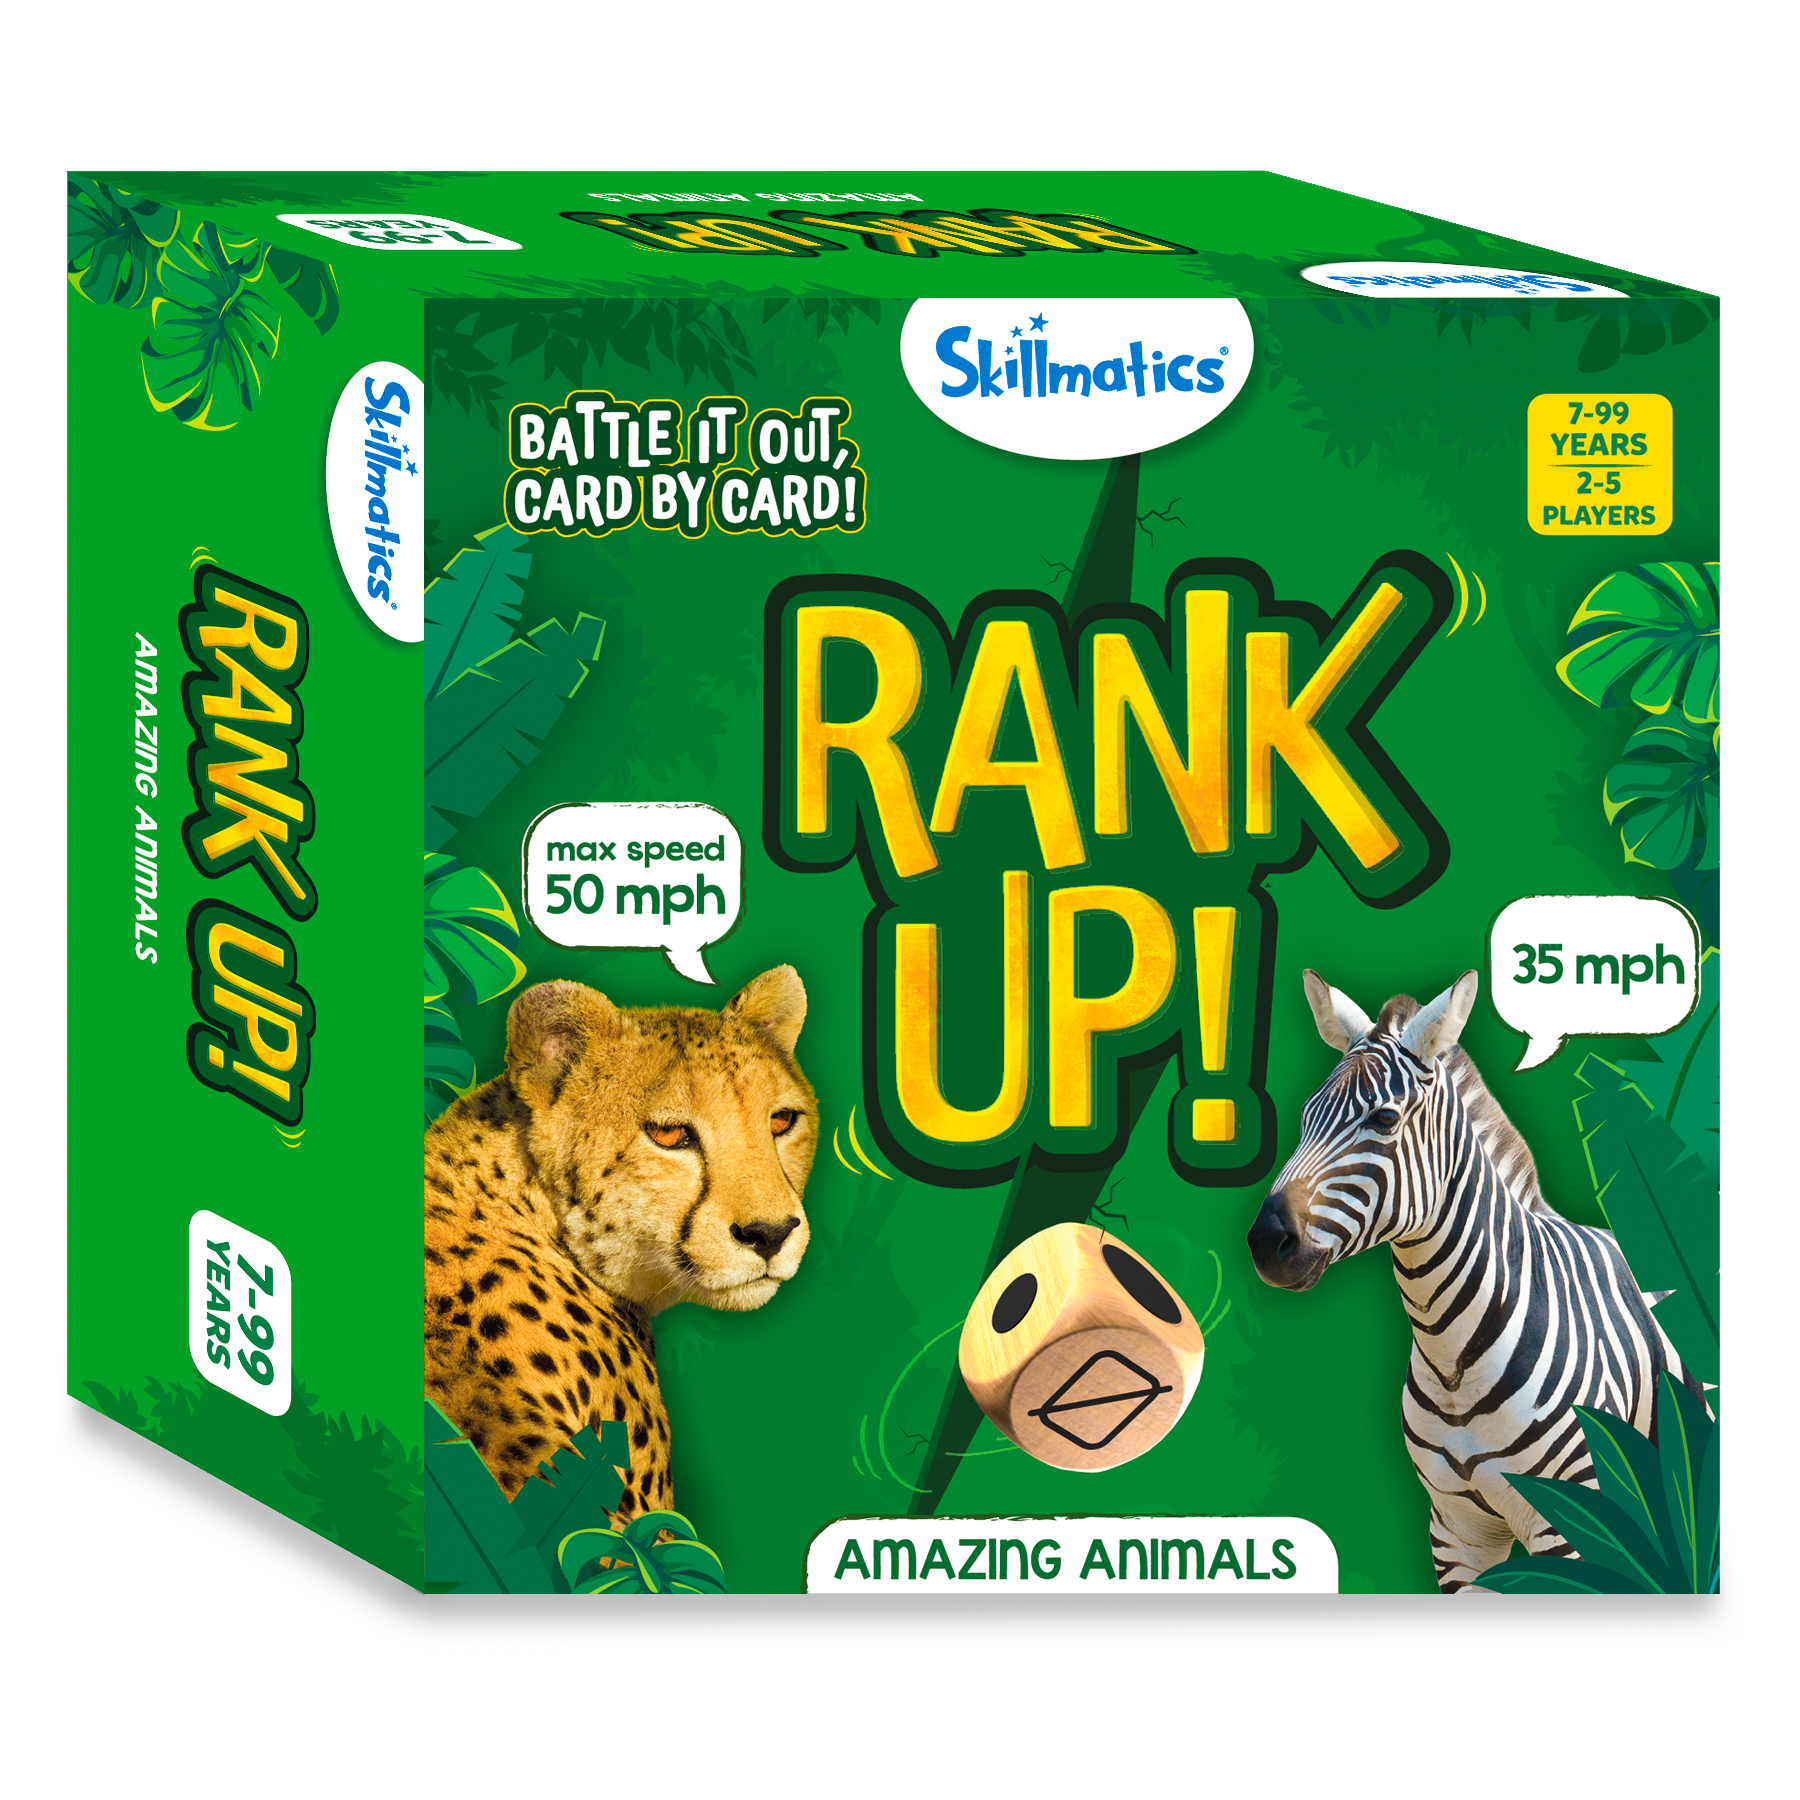 Skillmatics Trump Card Game - Rank Up Animals, Fun & Fast-Paced Game Of Memory, Perfect For Family Game Night, Gifts For Ages 7 And Up